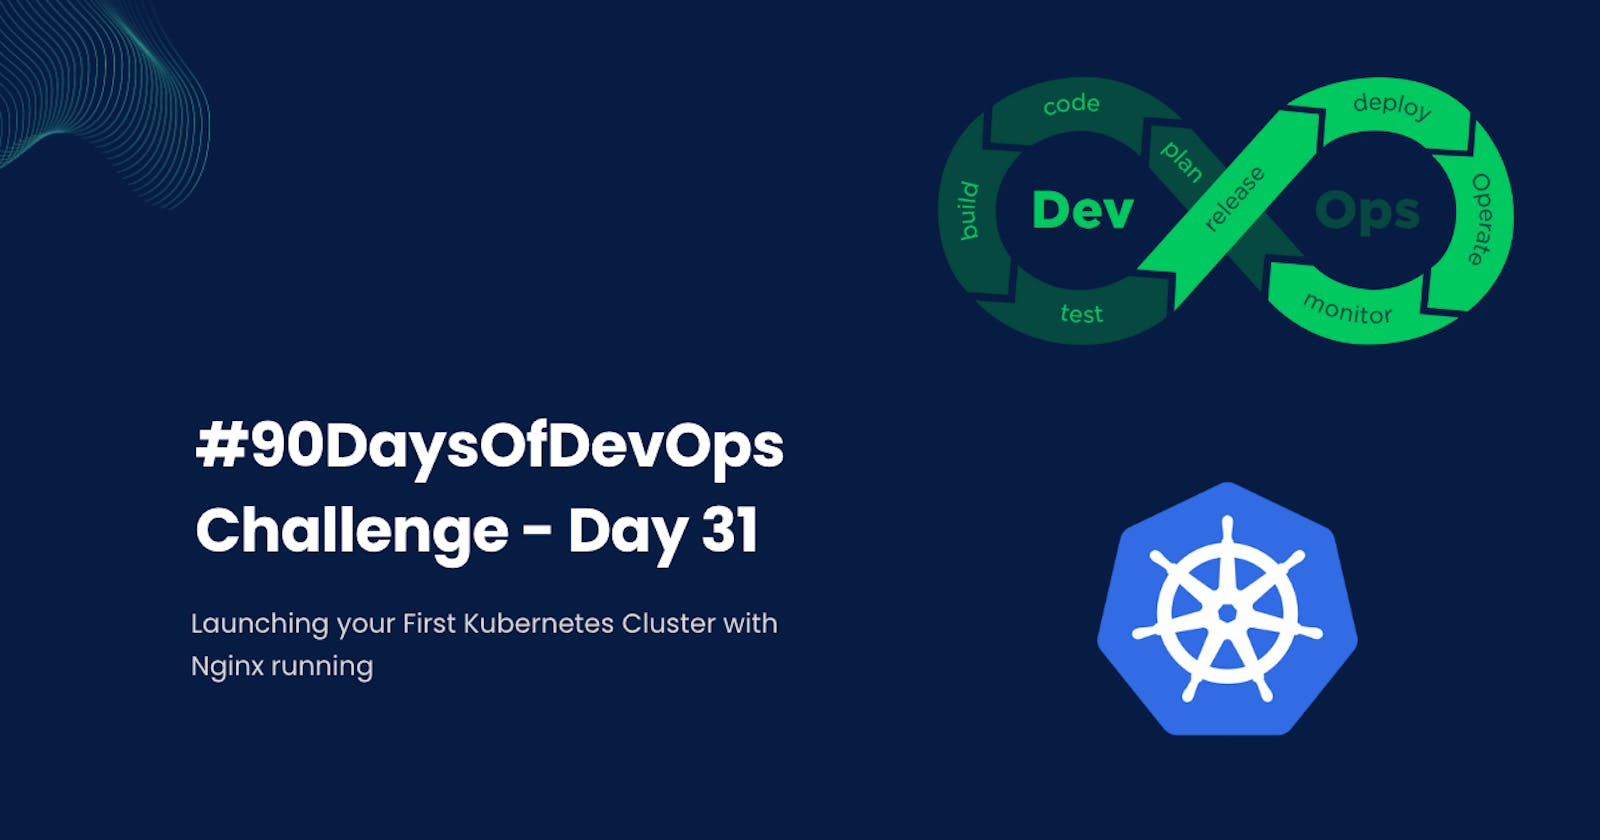 #90DaysOfDevOps Challenge - Day 31 - Launching your First Kubernetes Cluster with Nginx running